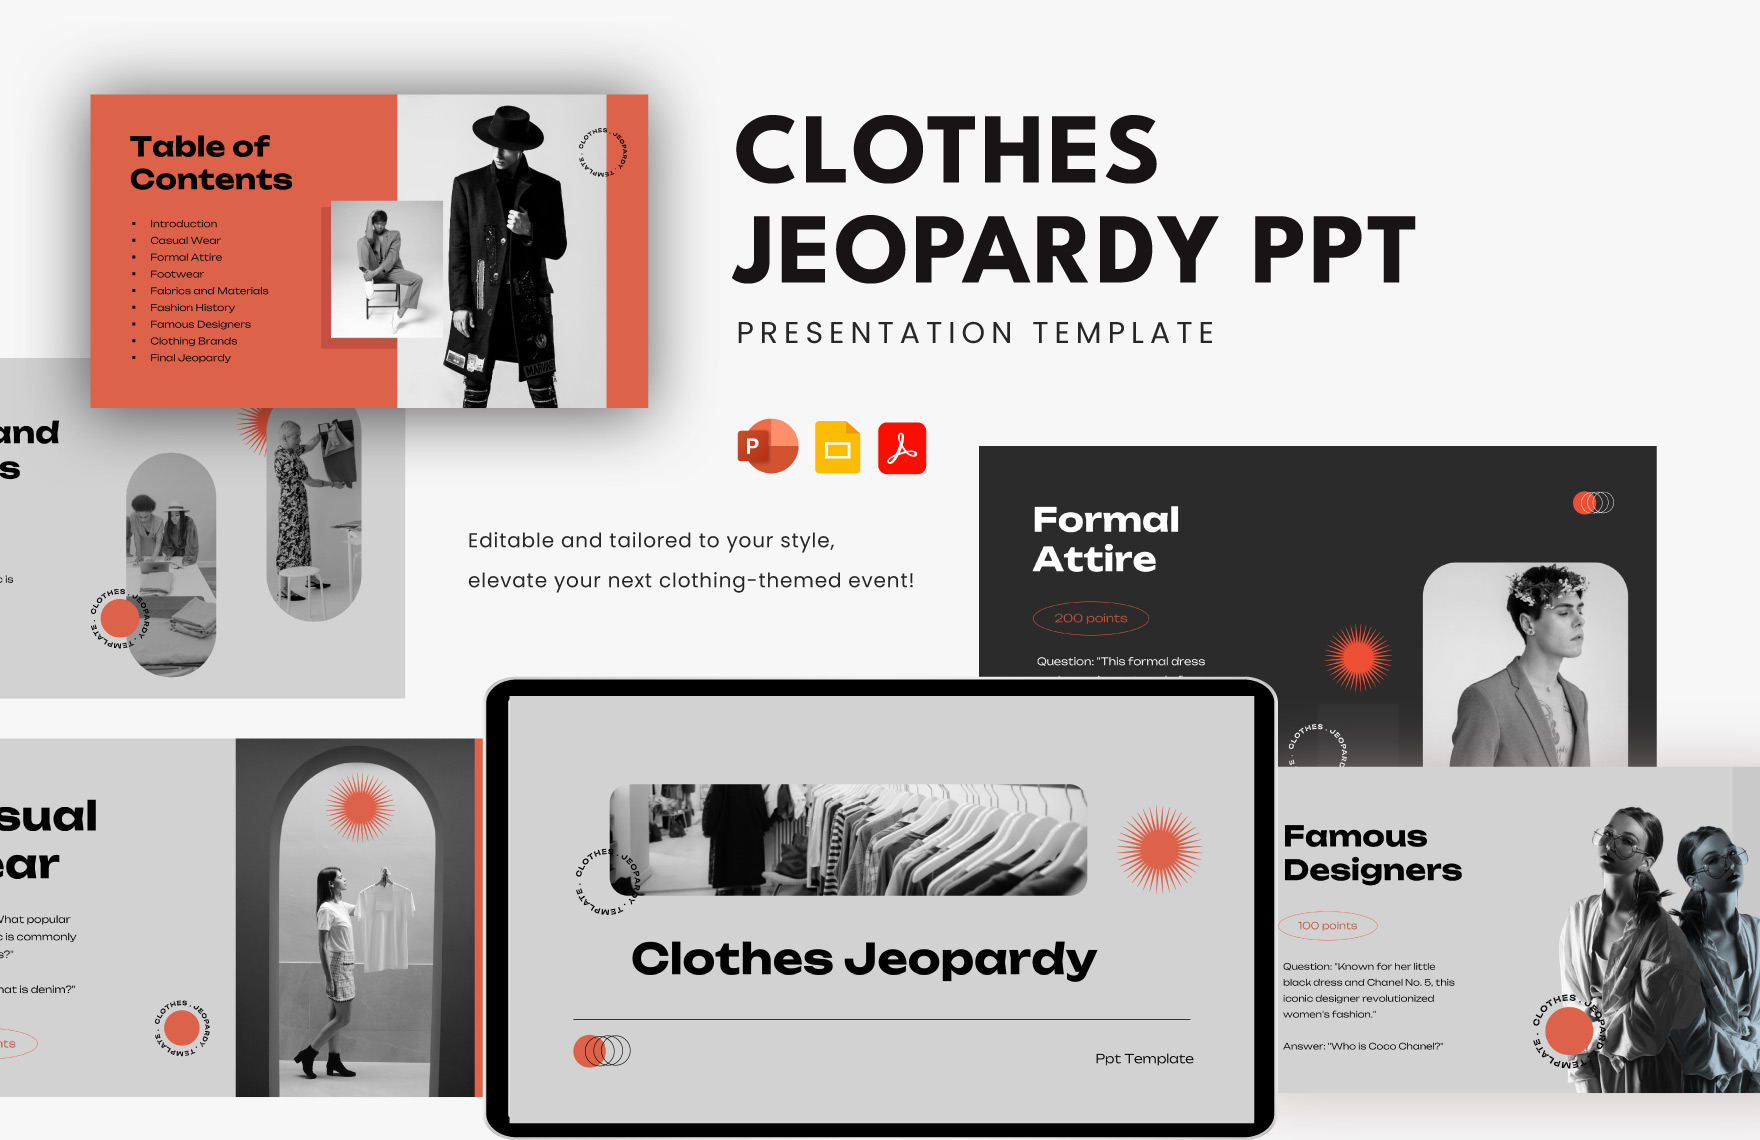 Clothes Jeopardy PPT Template